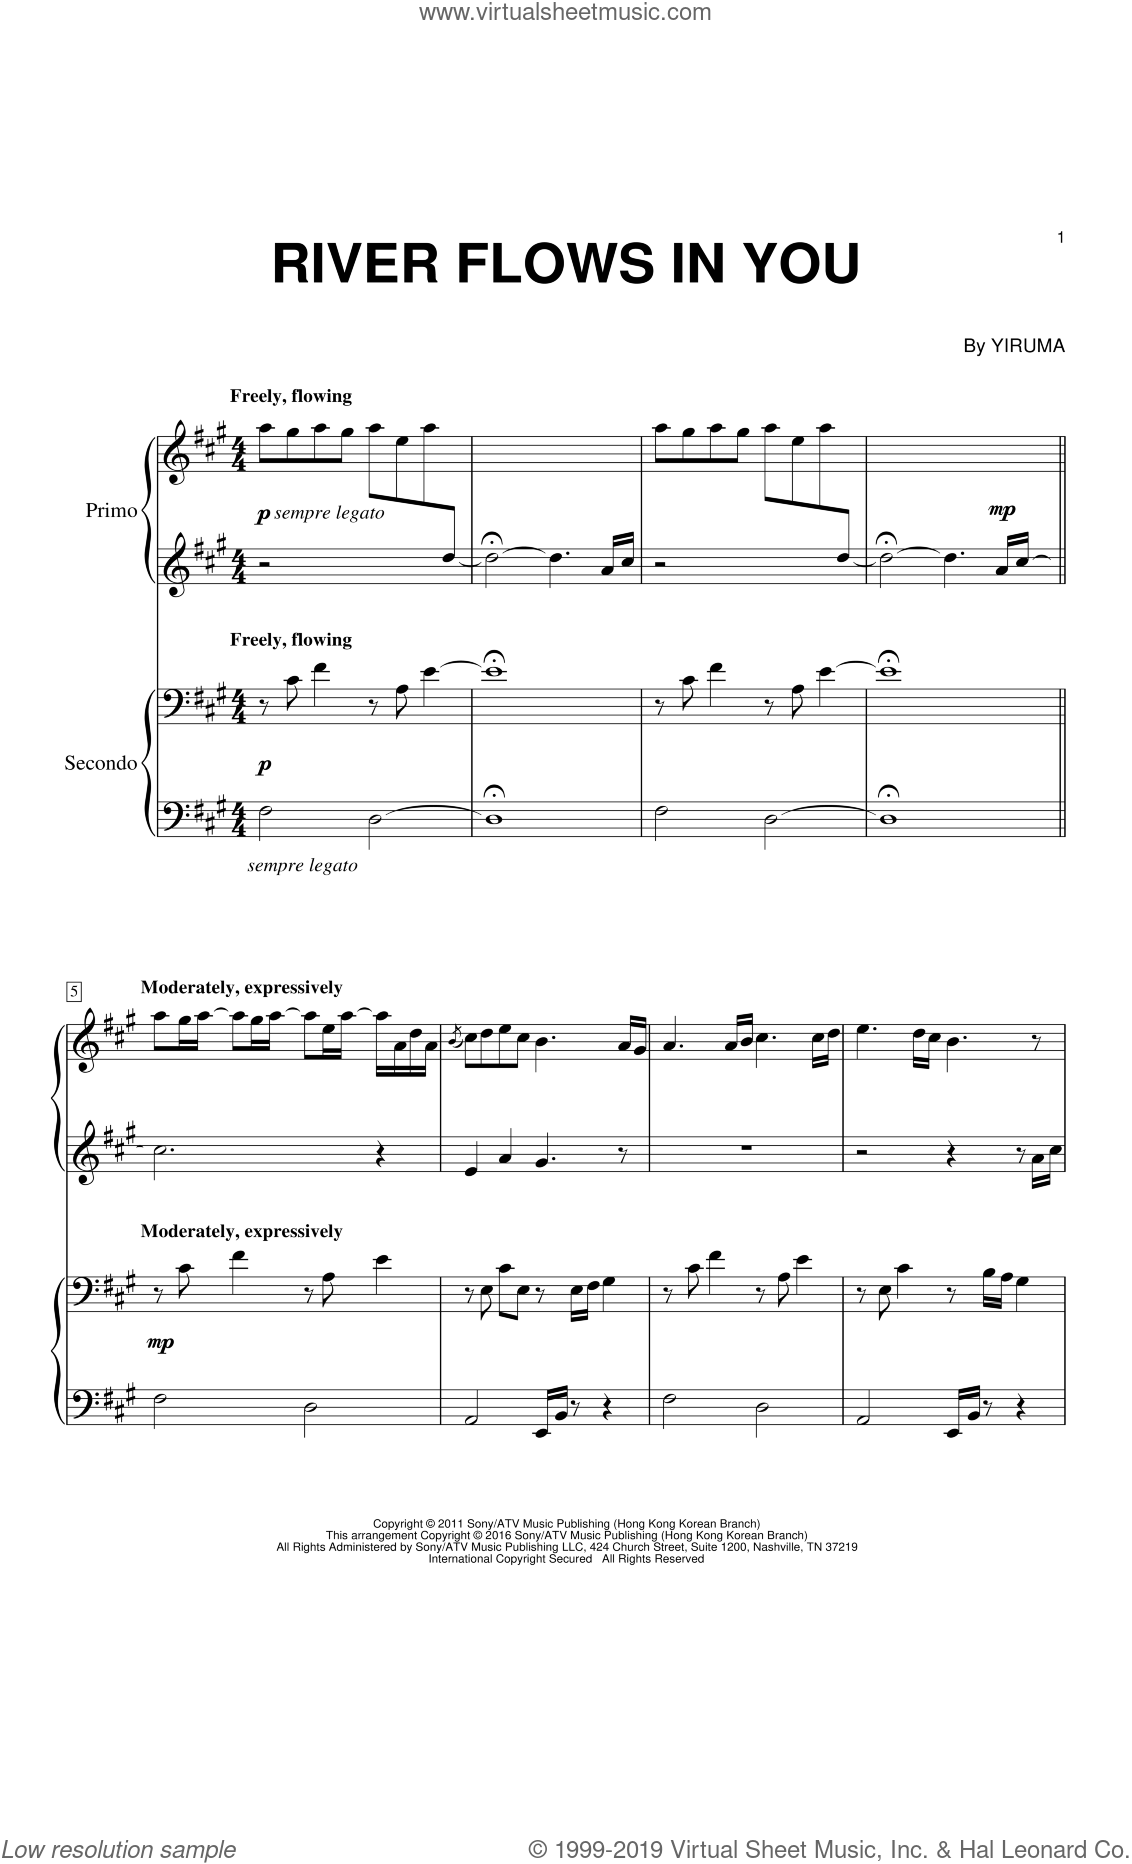 River Flows sheet music for piano four hands (PDF)